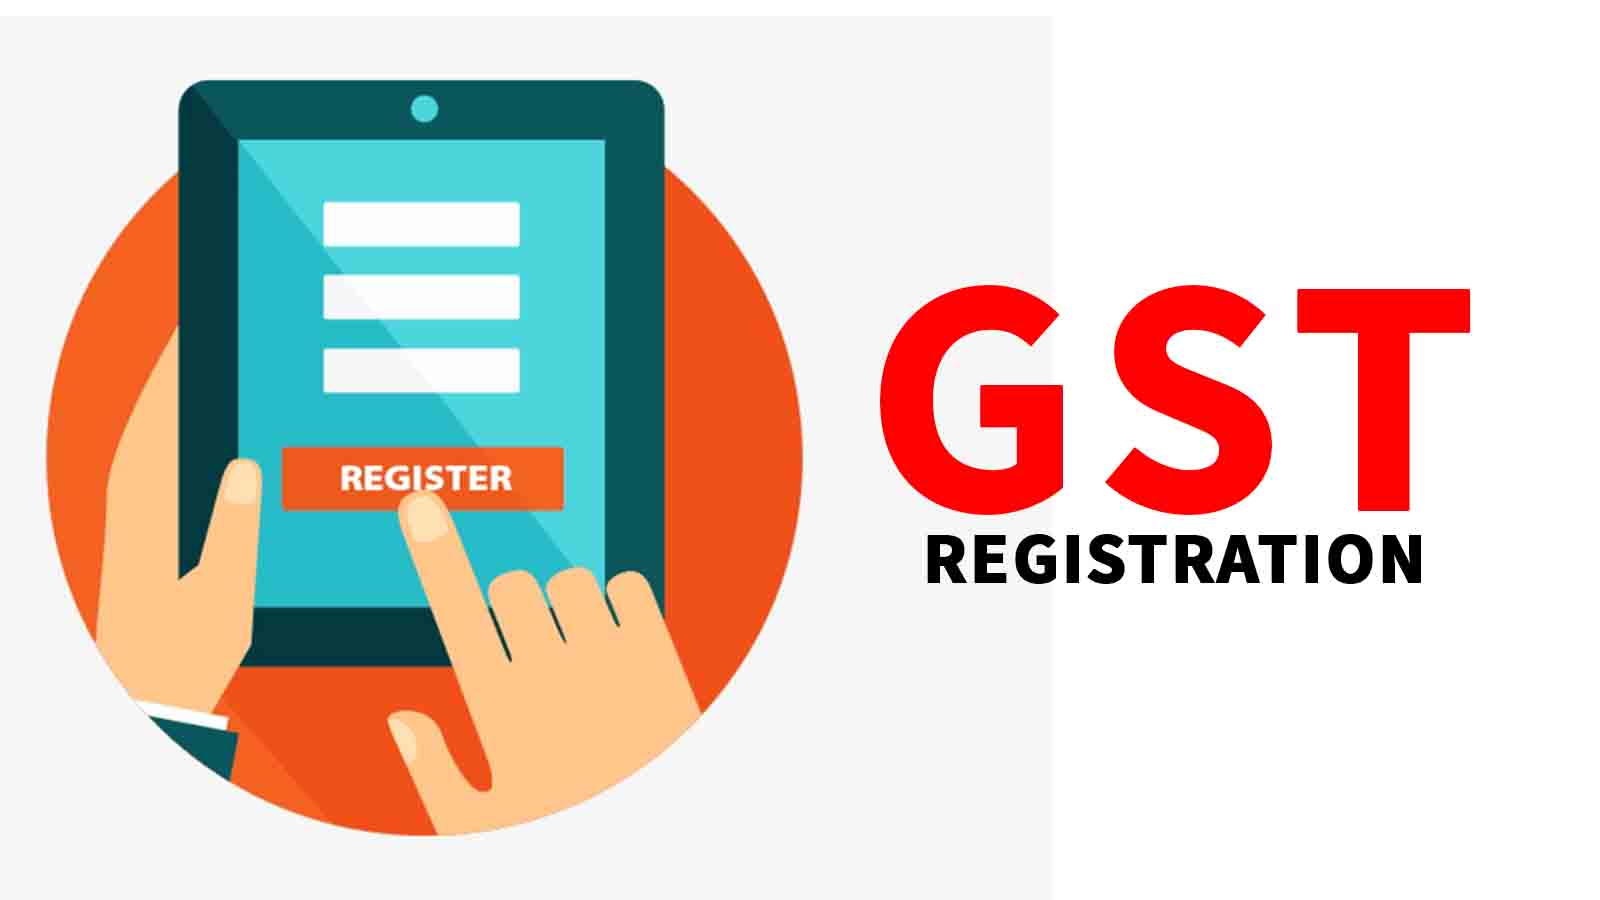 Registration Under GST ACT Cannot Be Cancelled By Merely Describing The Firm As 'Bogus